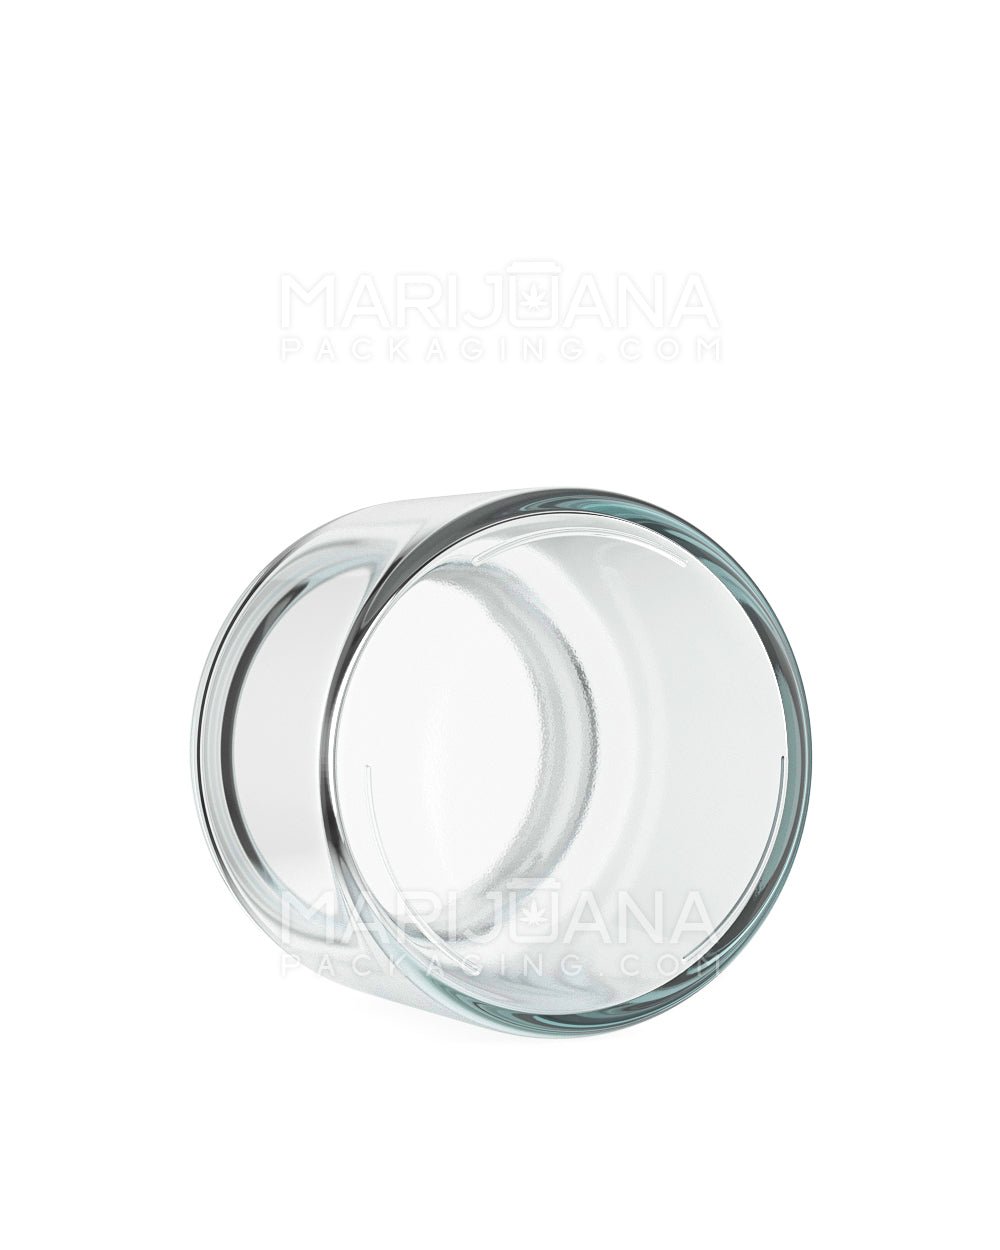 Straight Sided Clear Glass Jars | 53mm - 3oz - 144 Count - 5